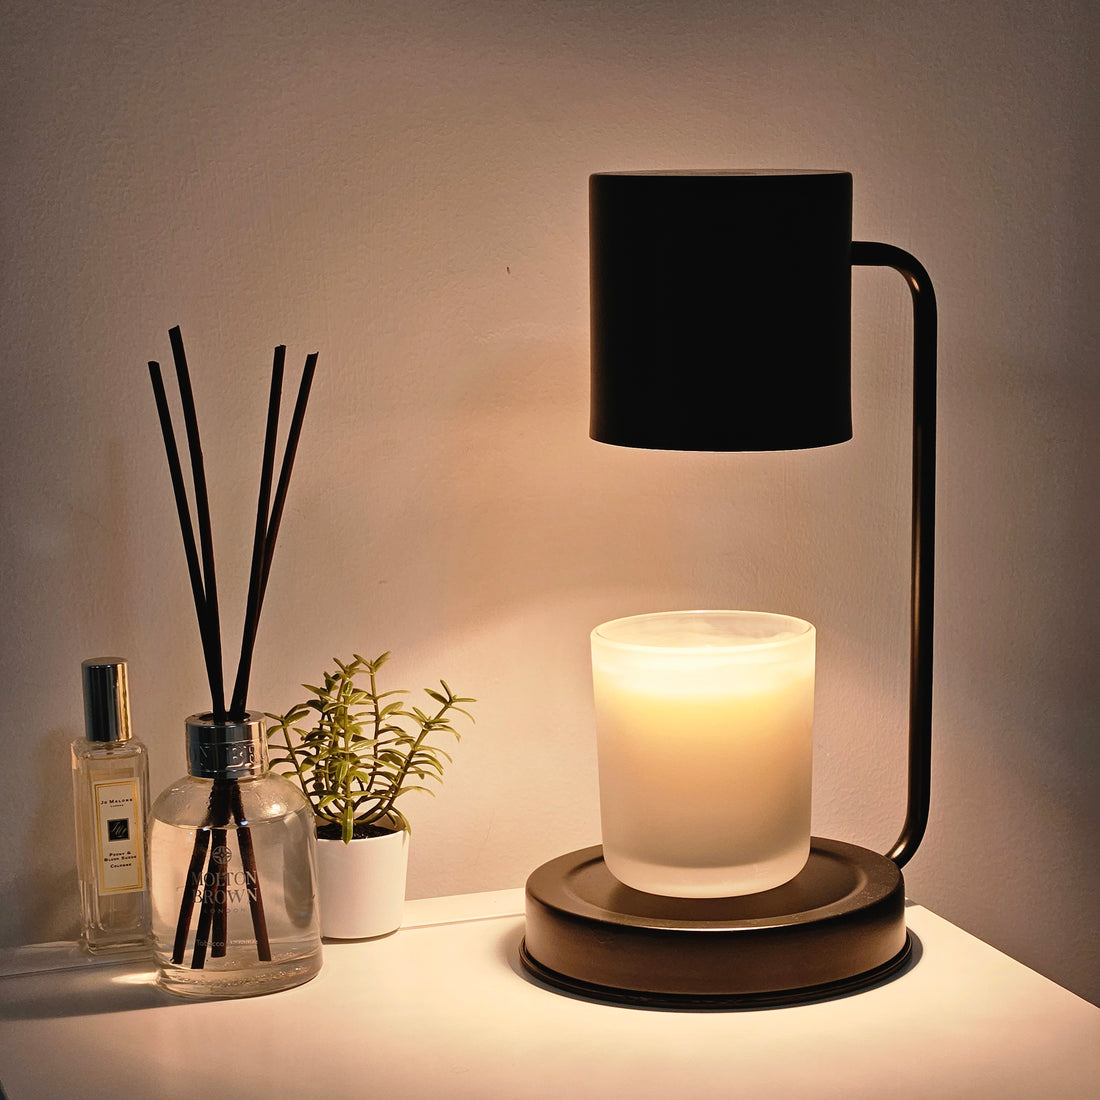 Illuminate Your Space and Mind with Candle Warmer Lamps and Yoga